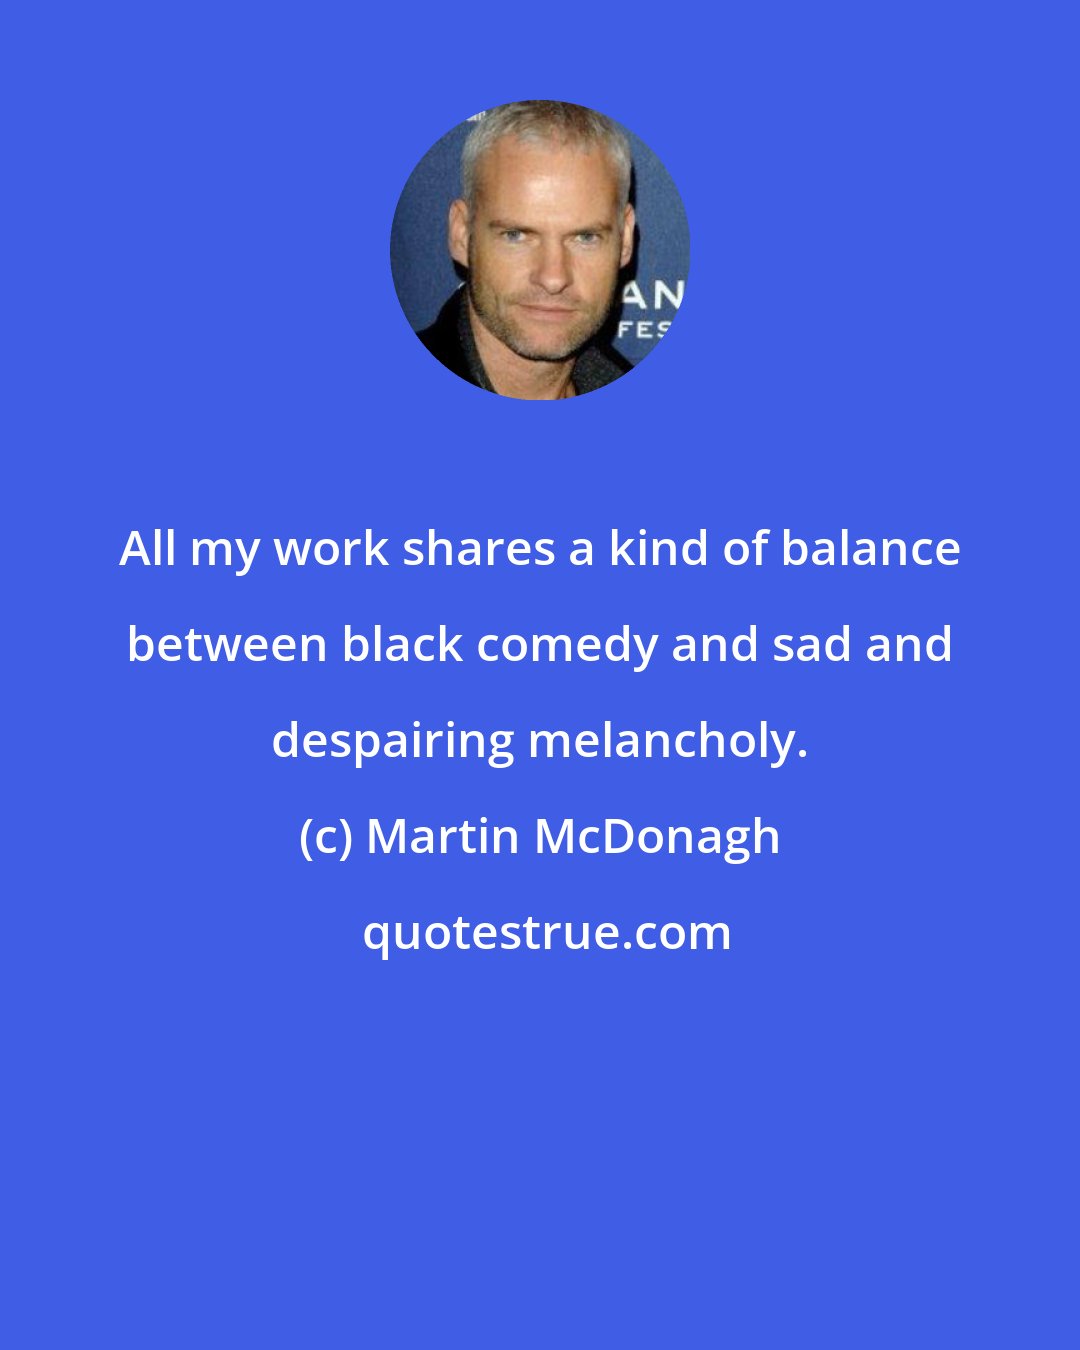 Martin McDonagh: All my work shares a kind of balance between black comedy and sad and despairing melancholy.